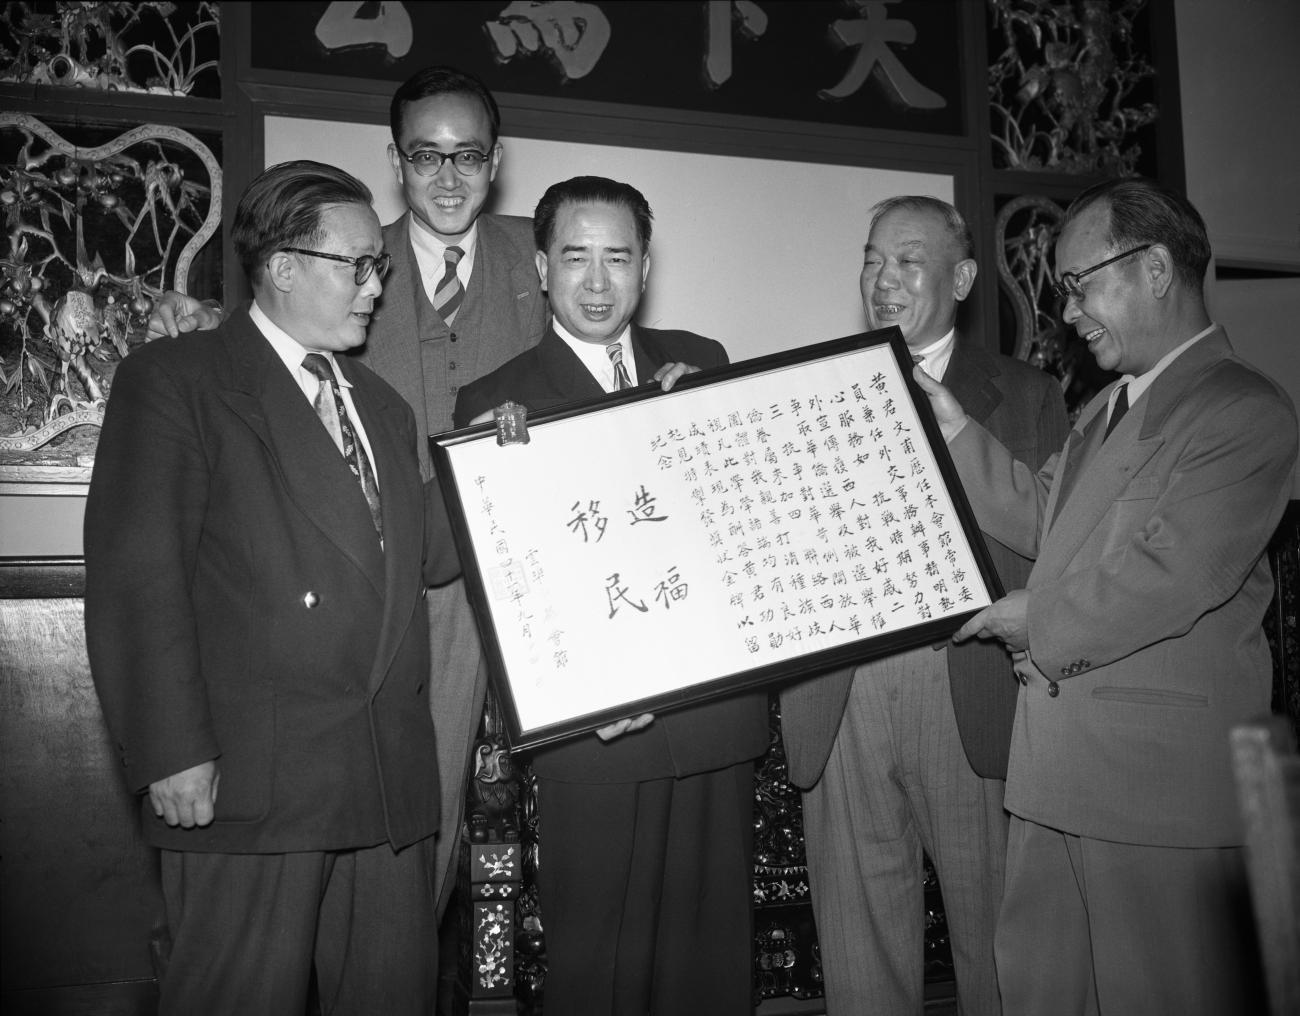 Wong Foon Sien and four other men holding a framed text of Chinese characters.